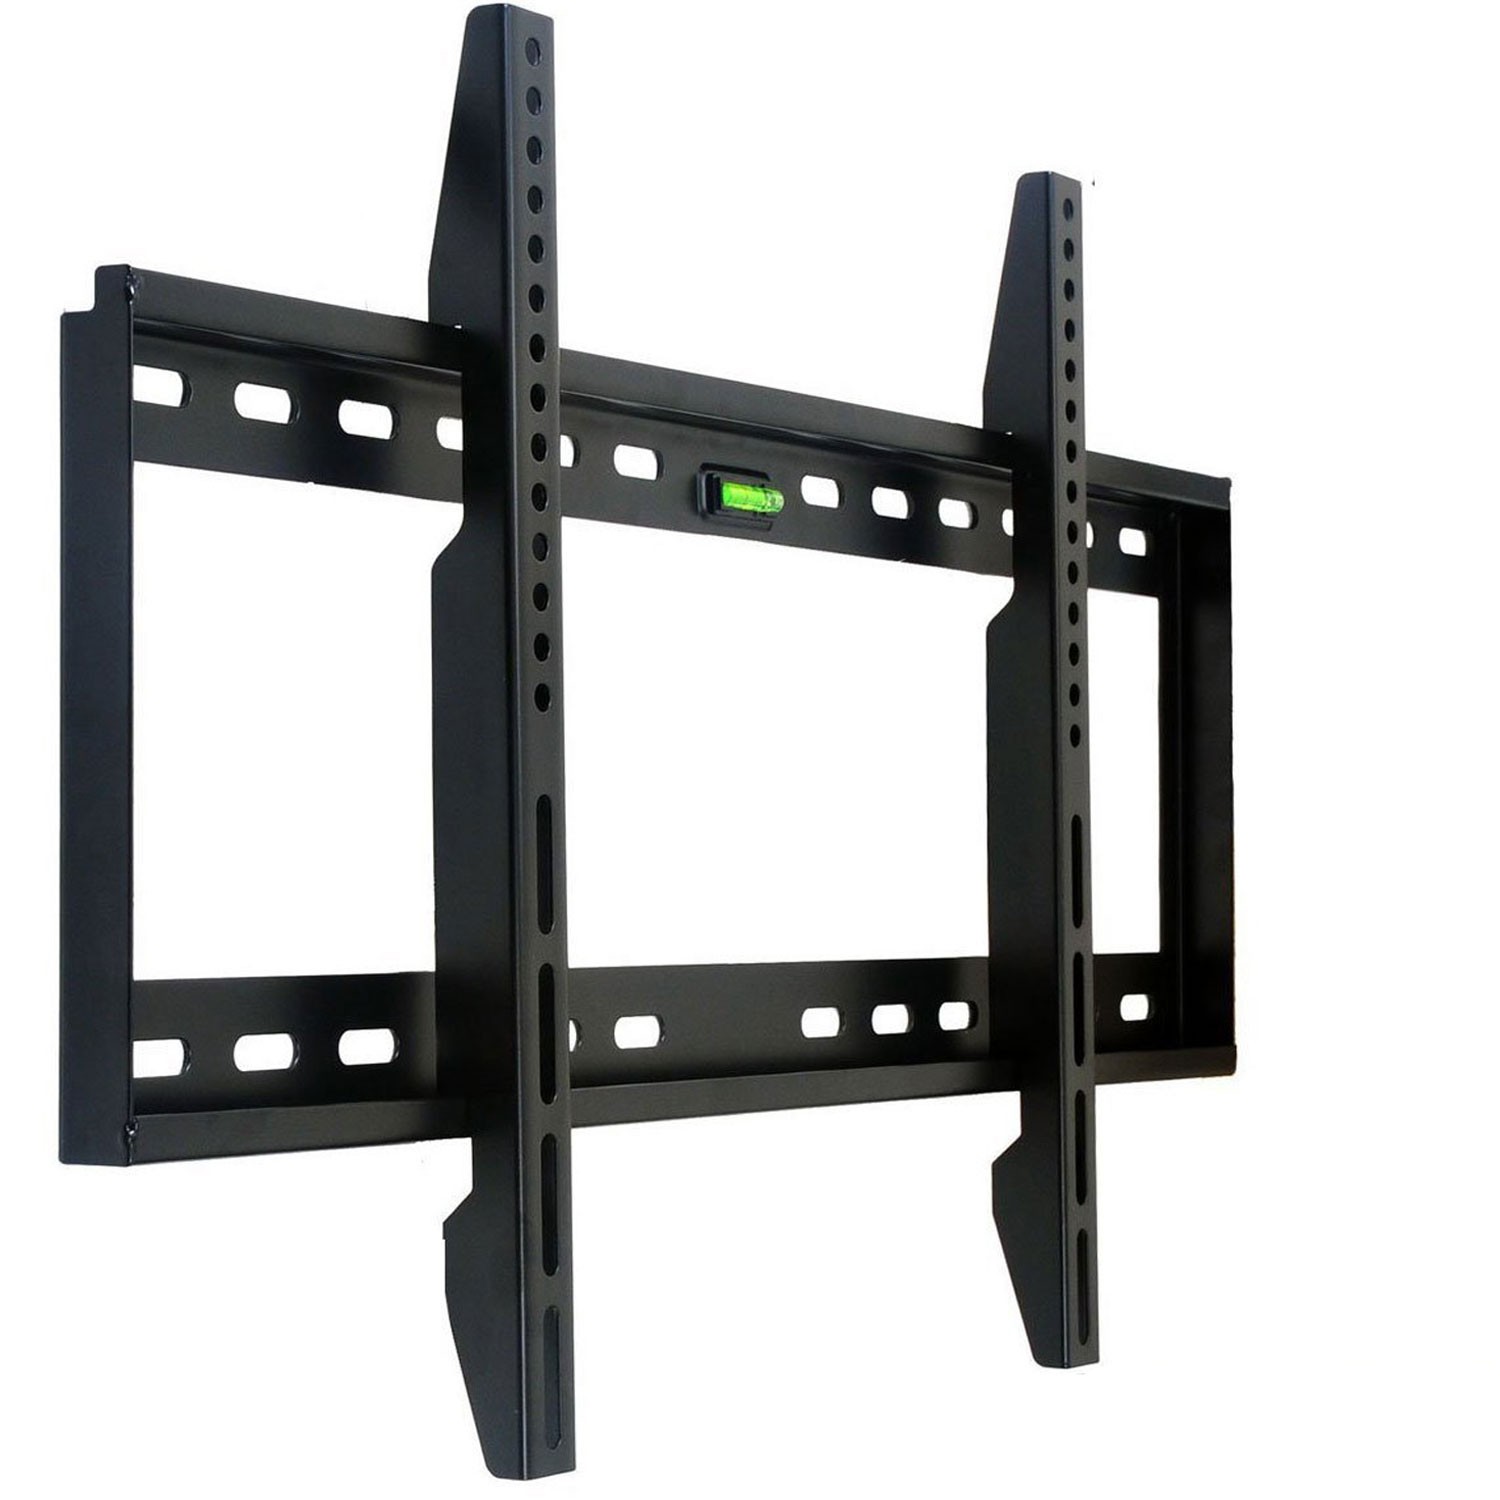 VideoSecu Heavy Duty TV Wall Mount for Sony 40 43 48 49 50 55 60 65 75 Inch XBR-49X800E XBR-55A1E XBR-55X930D XBR-55X930E XBR-65A1E XBR-65X850E LED LCD Plasma Flat Panel Screen HDTV Display MN7 - image 1 of 3